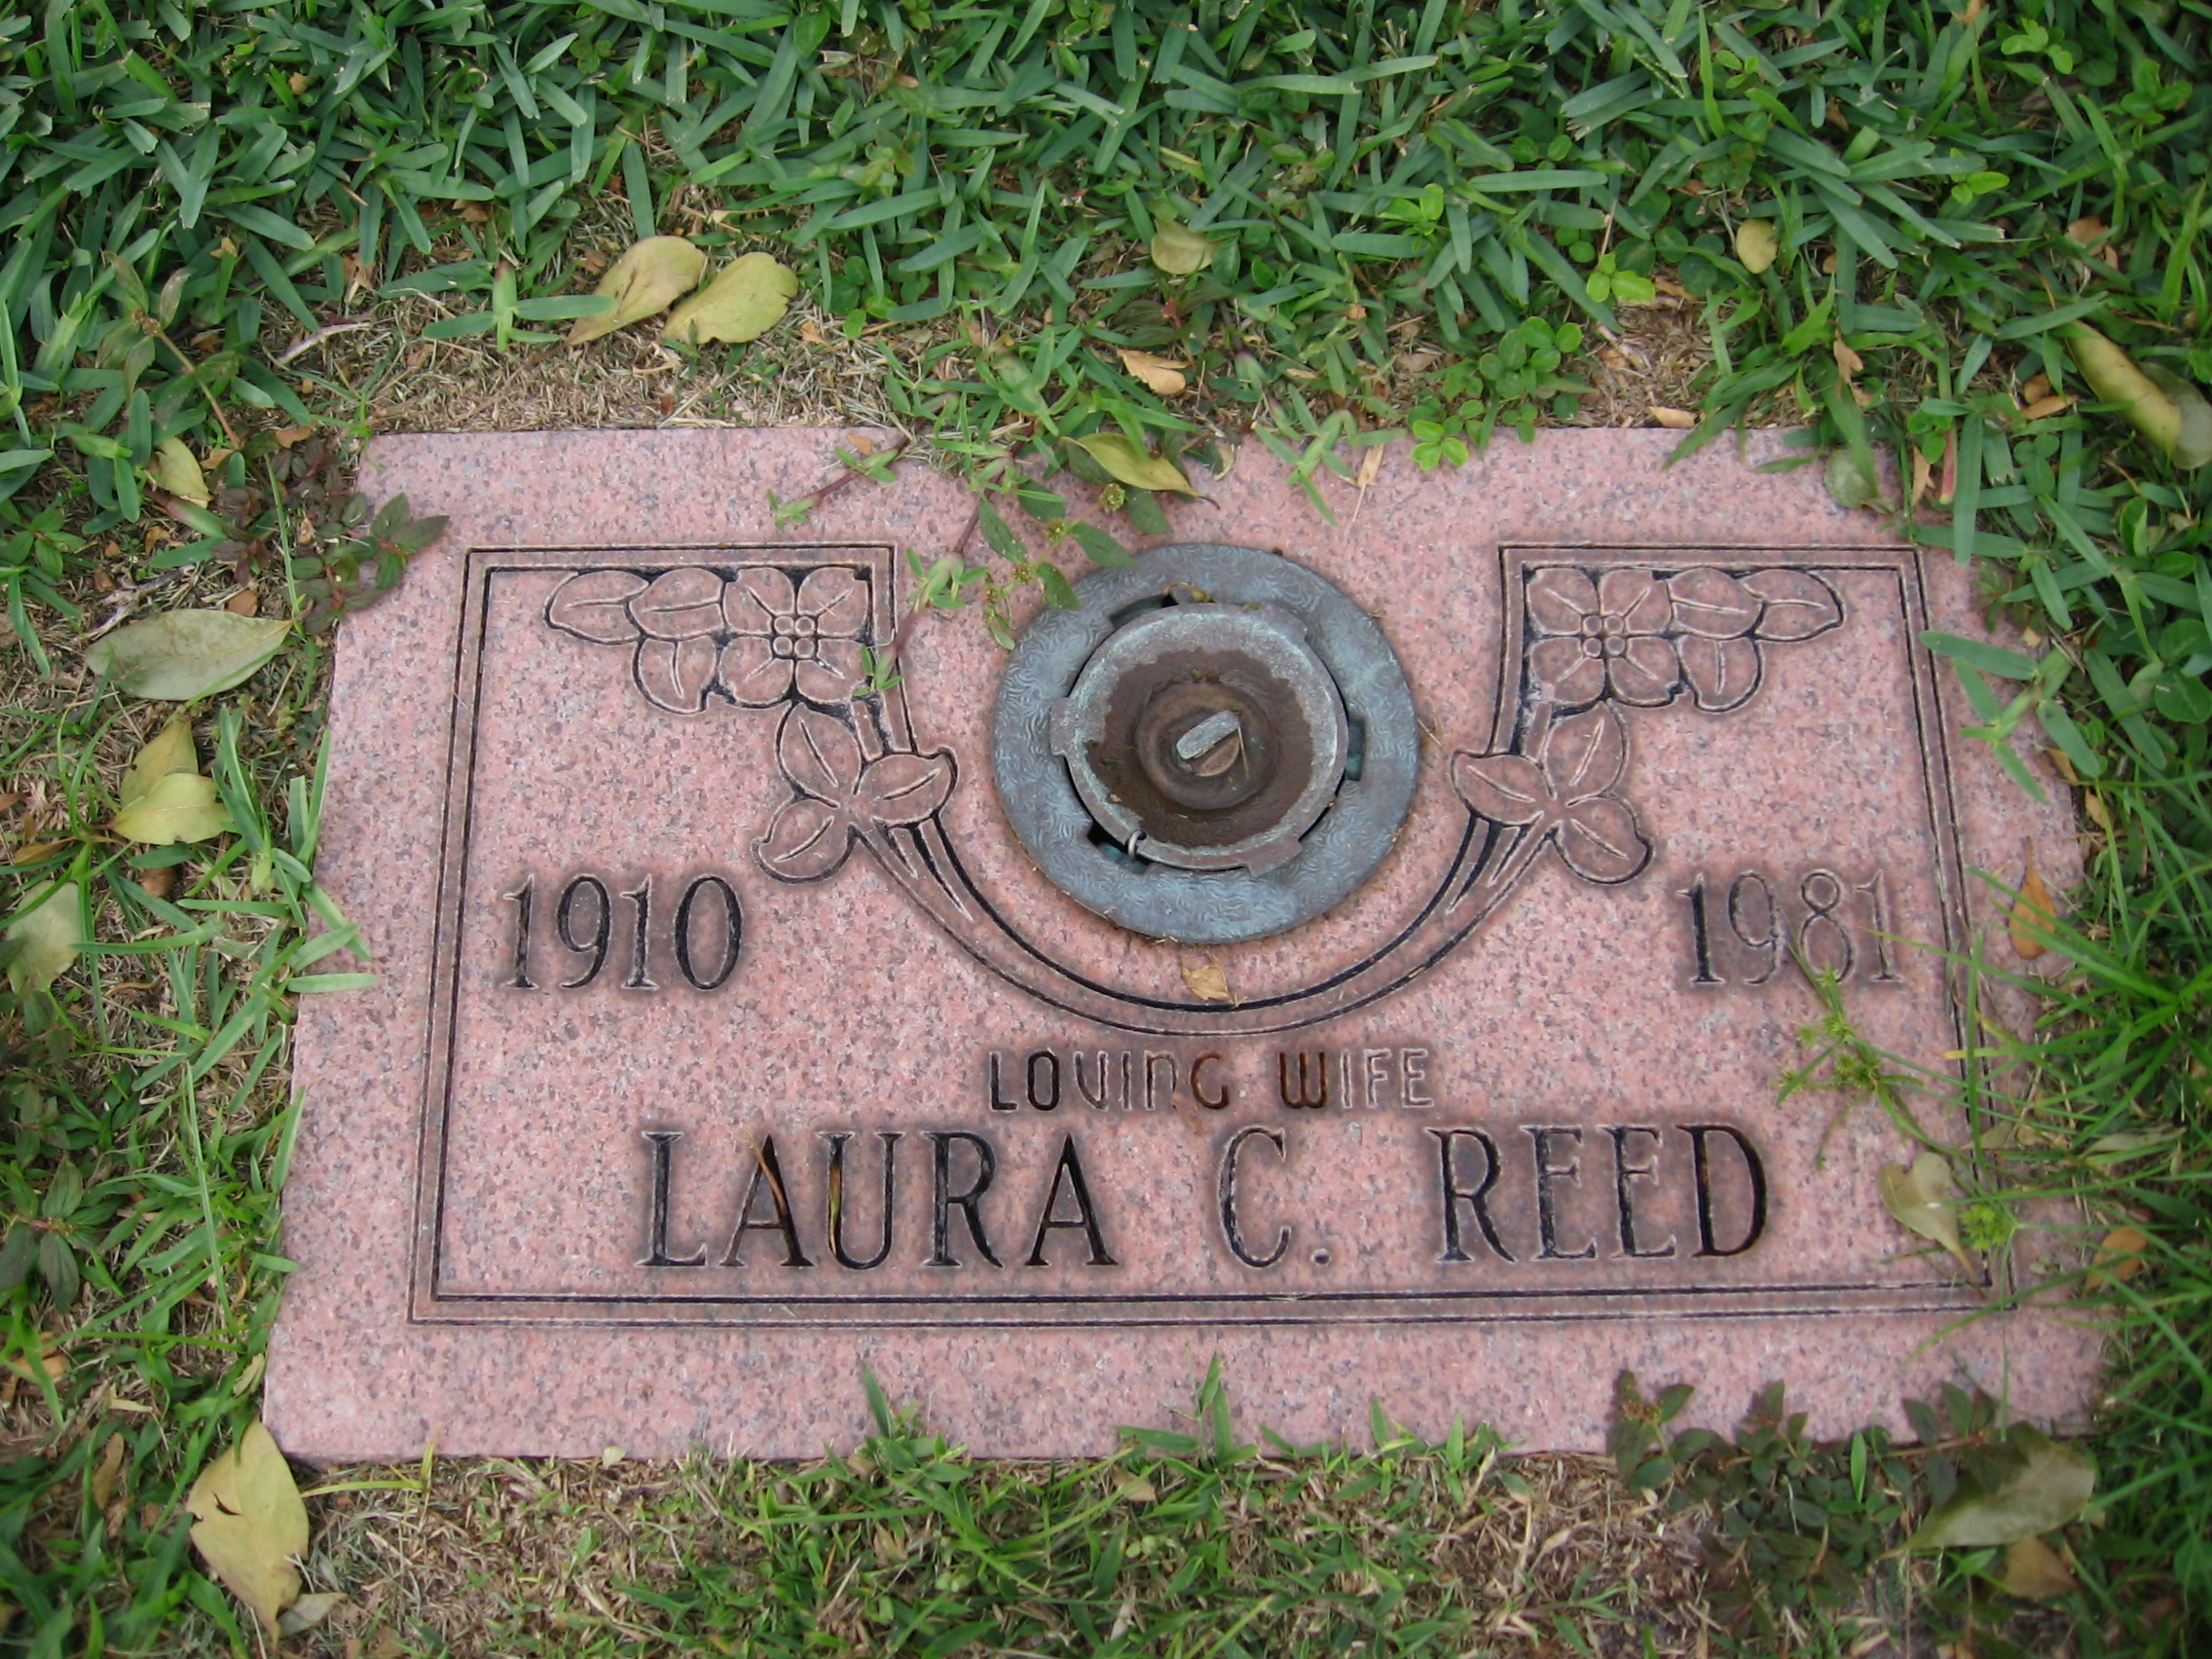 Laura C Reed